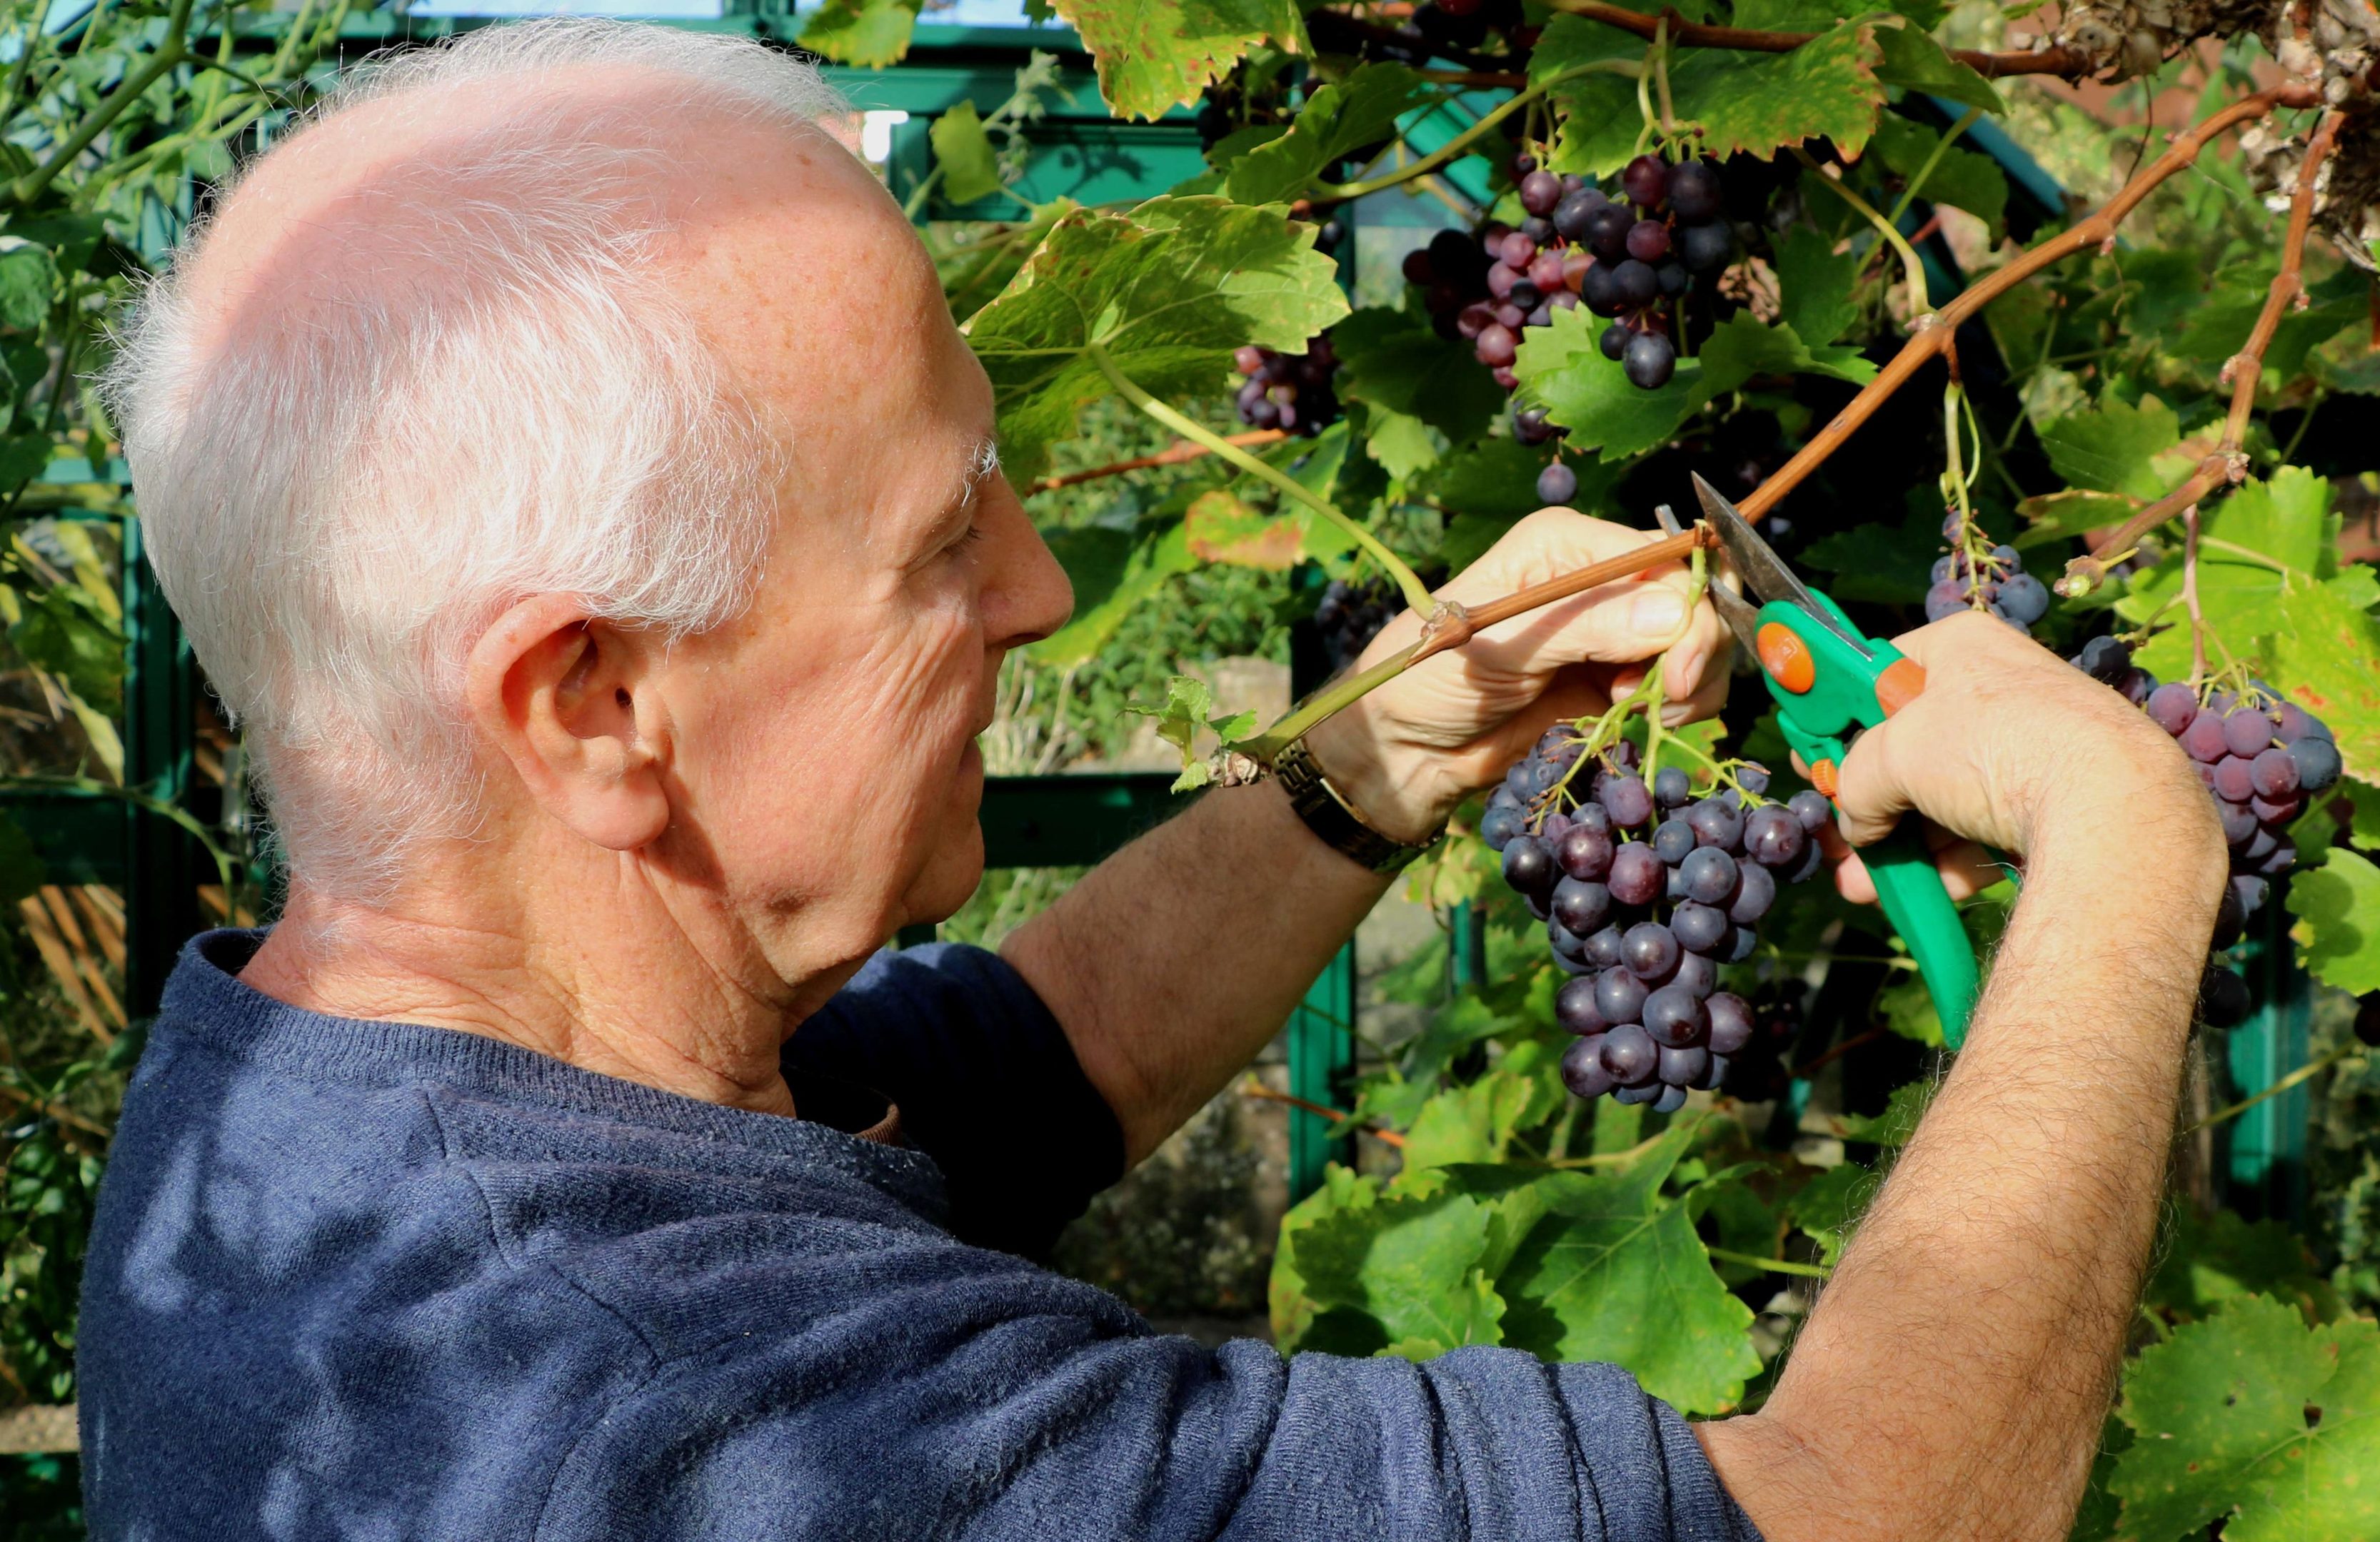 Cutting a bunch of black grapes